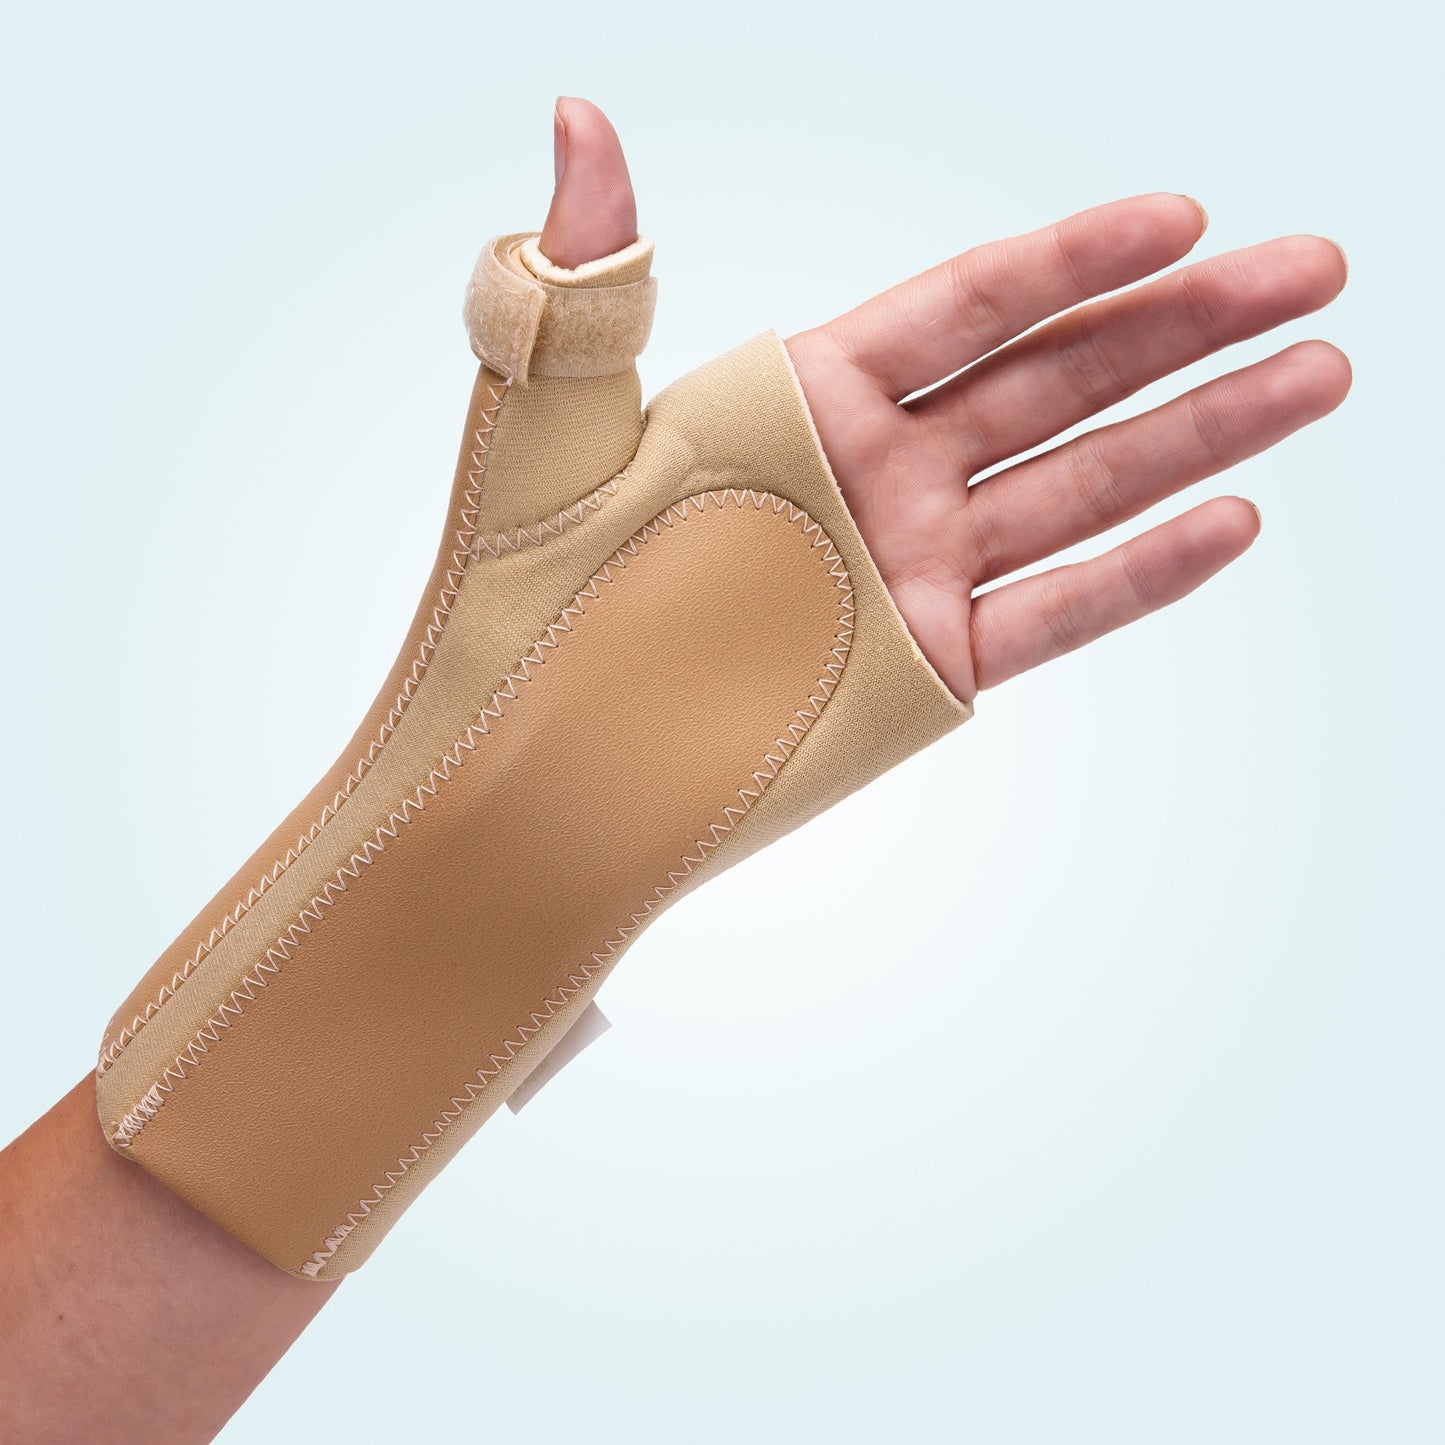 Neo Thumb Wrist Support (CLOSED)